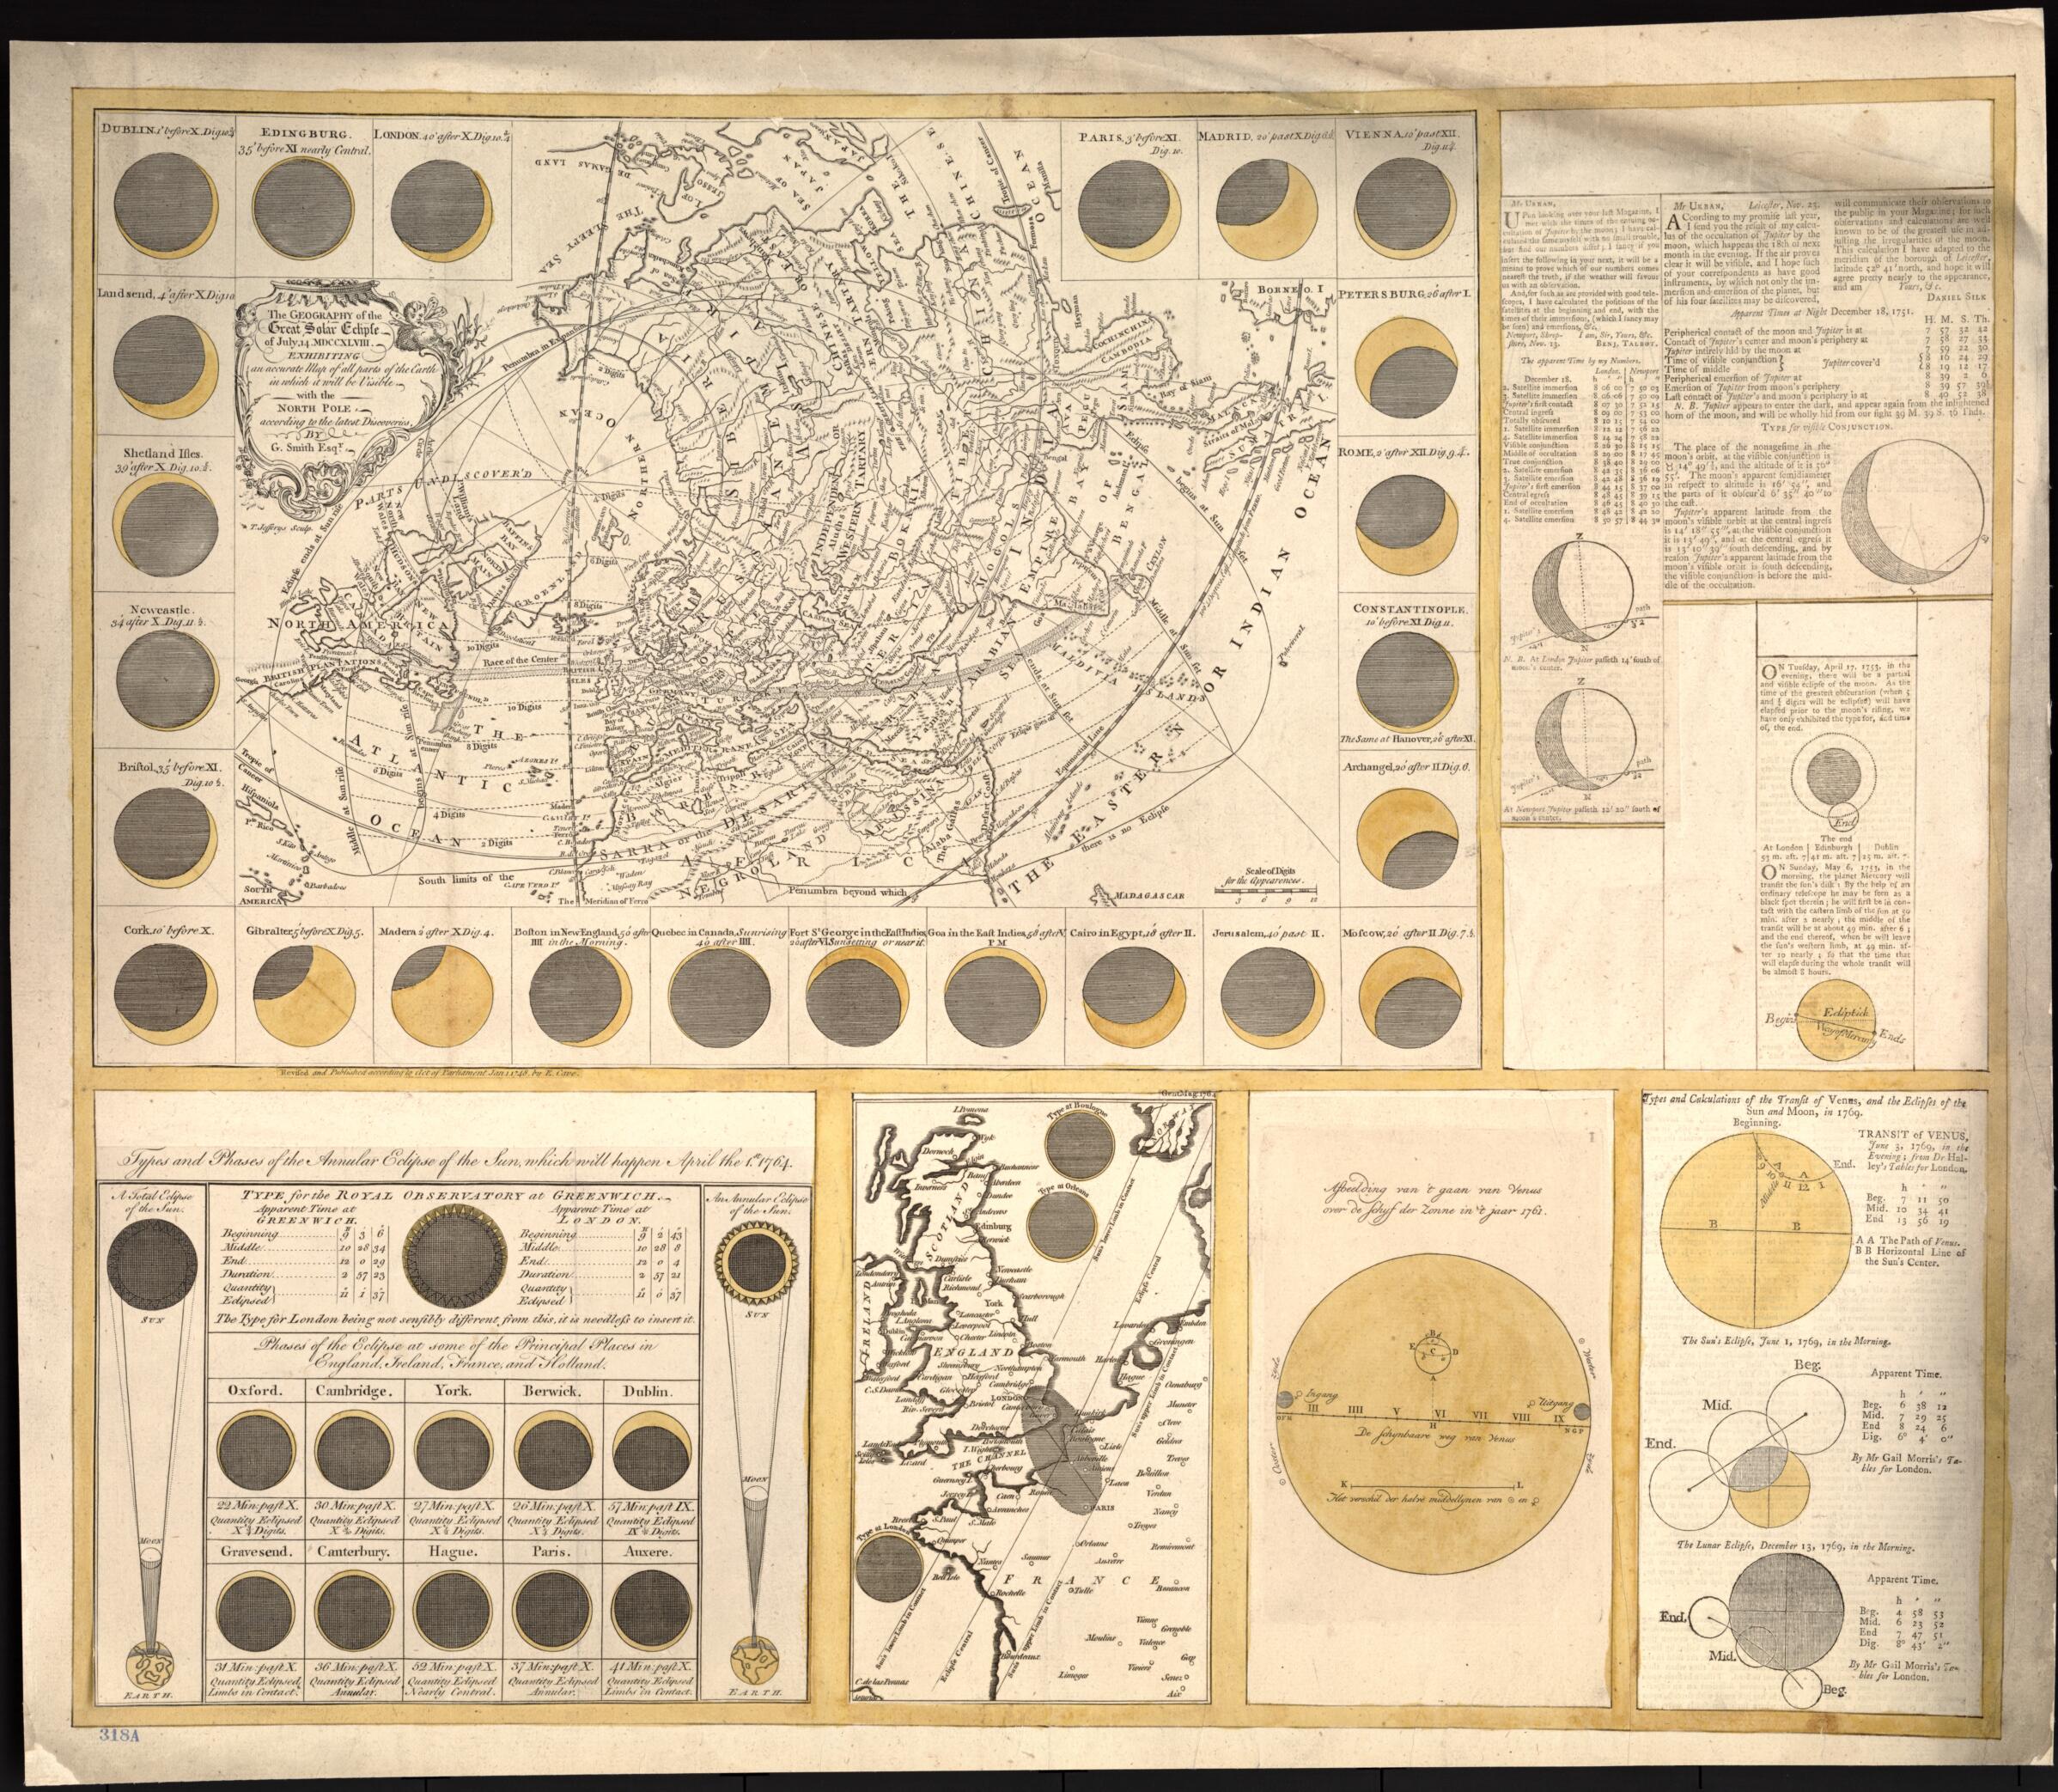 This old map of The Geography of the Great Solar Eclipse of July 14 MDCCXLVIII : Exhibiting an Accurate Map of All Parts of the Earth In Which It Will Be Visible, With the North Pole, According to the Latest Discoveries from 1748 was created by Edward Cave, George Smith in 1748